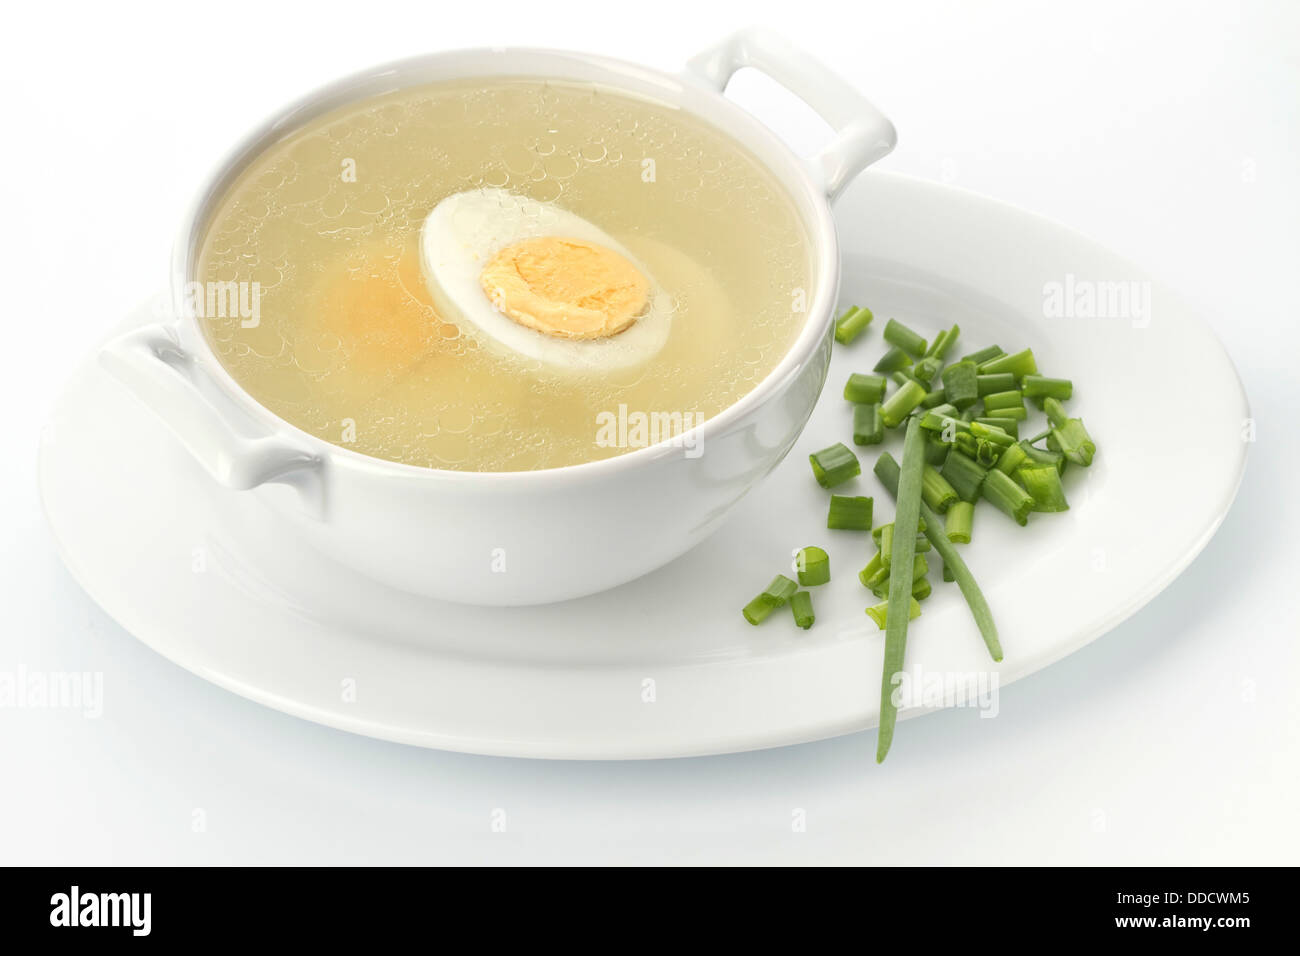 Served place setting with chicken broth and chives Stock Photo